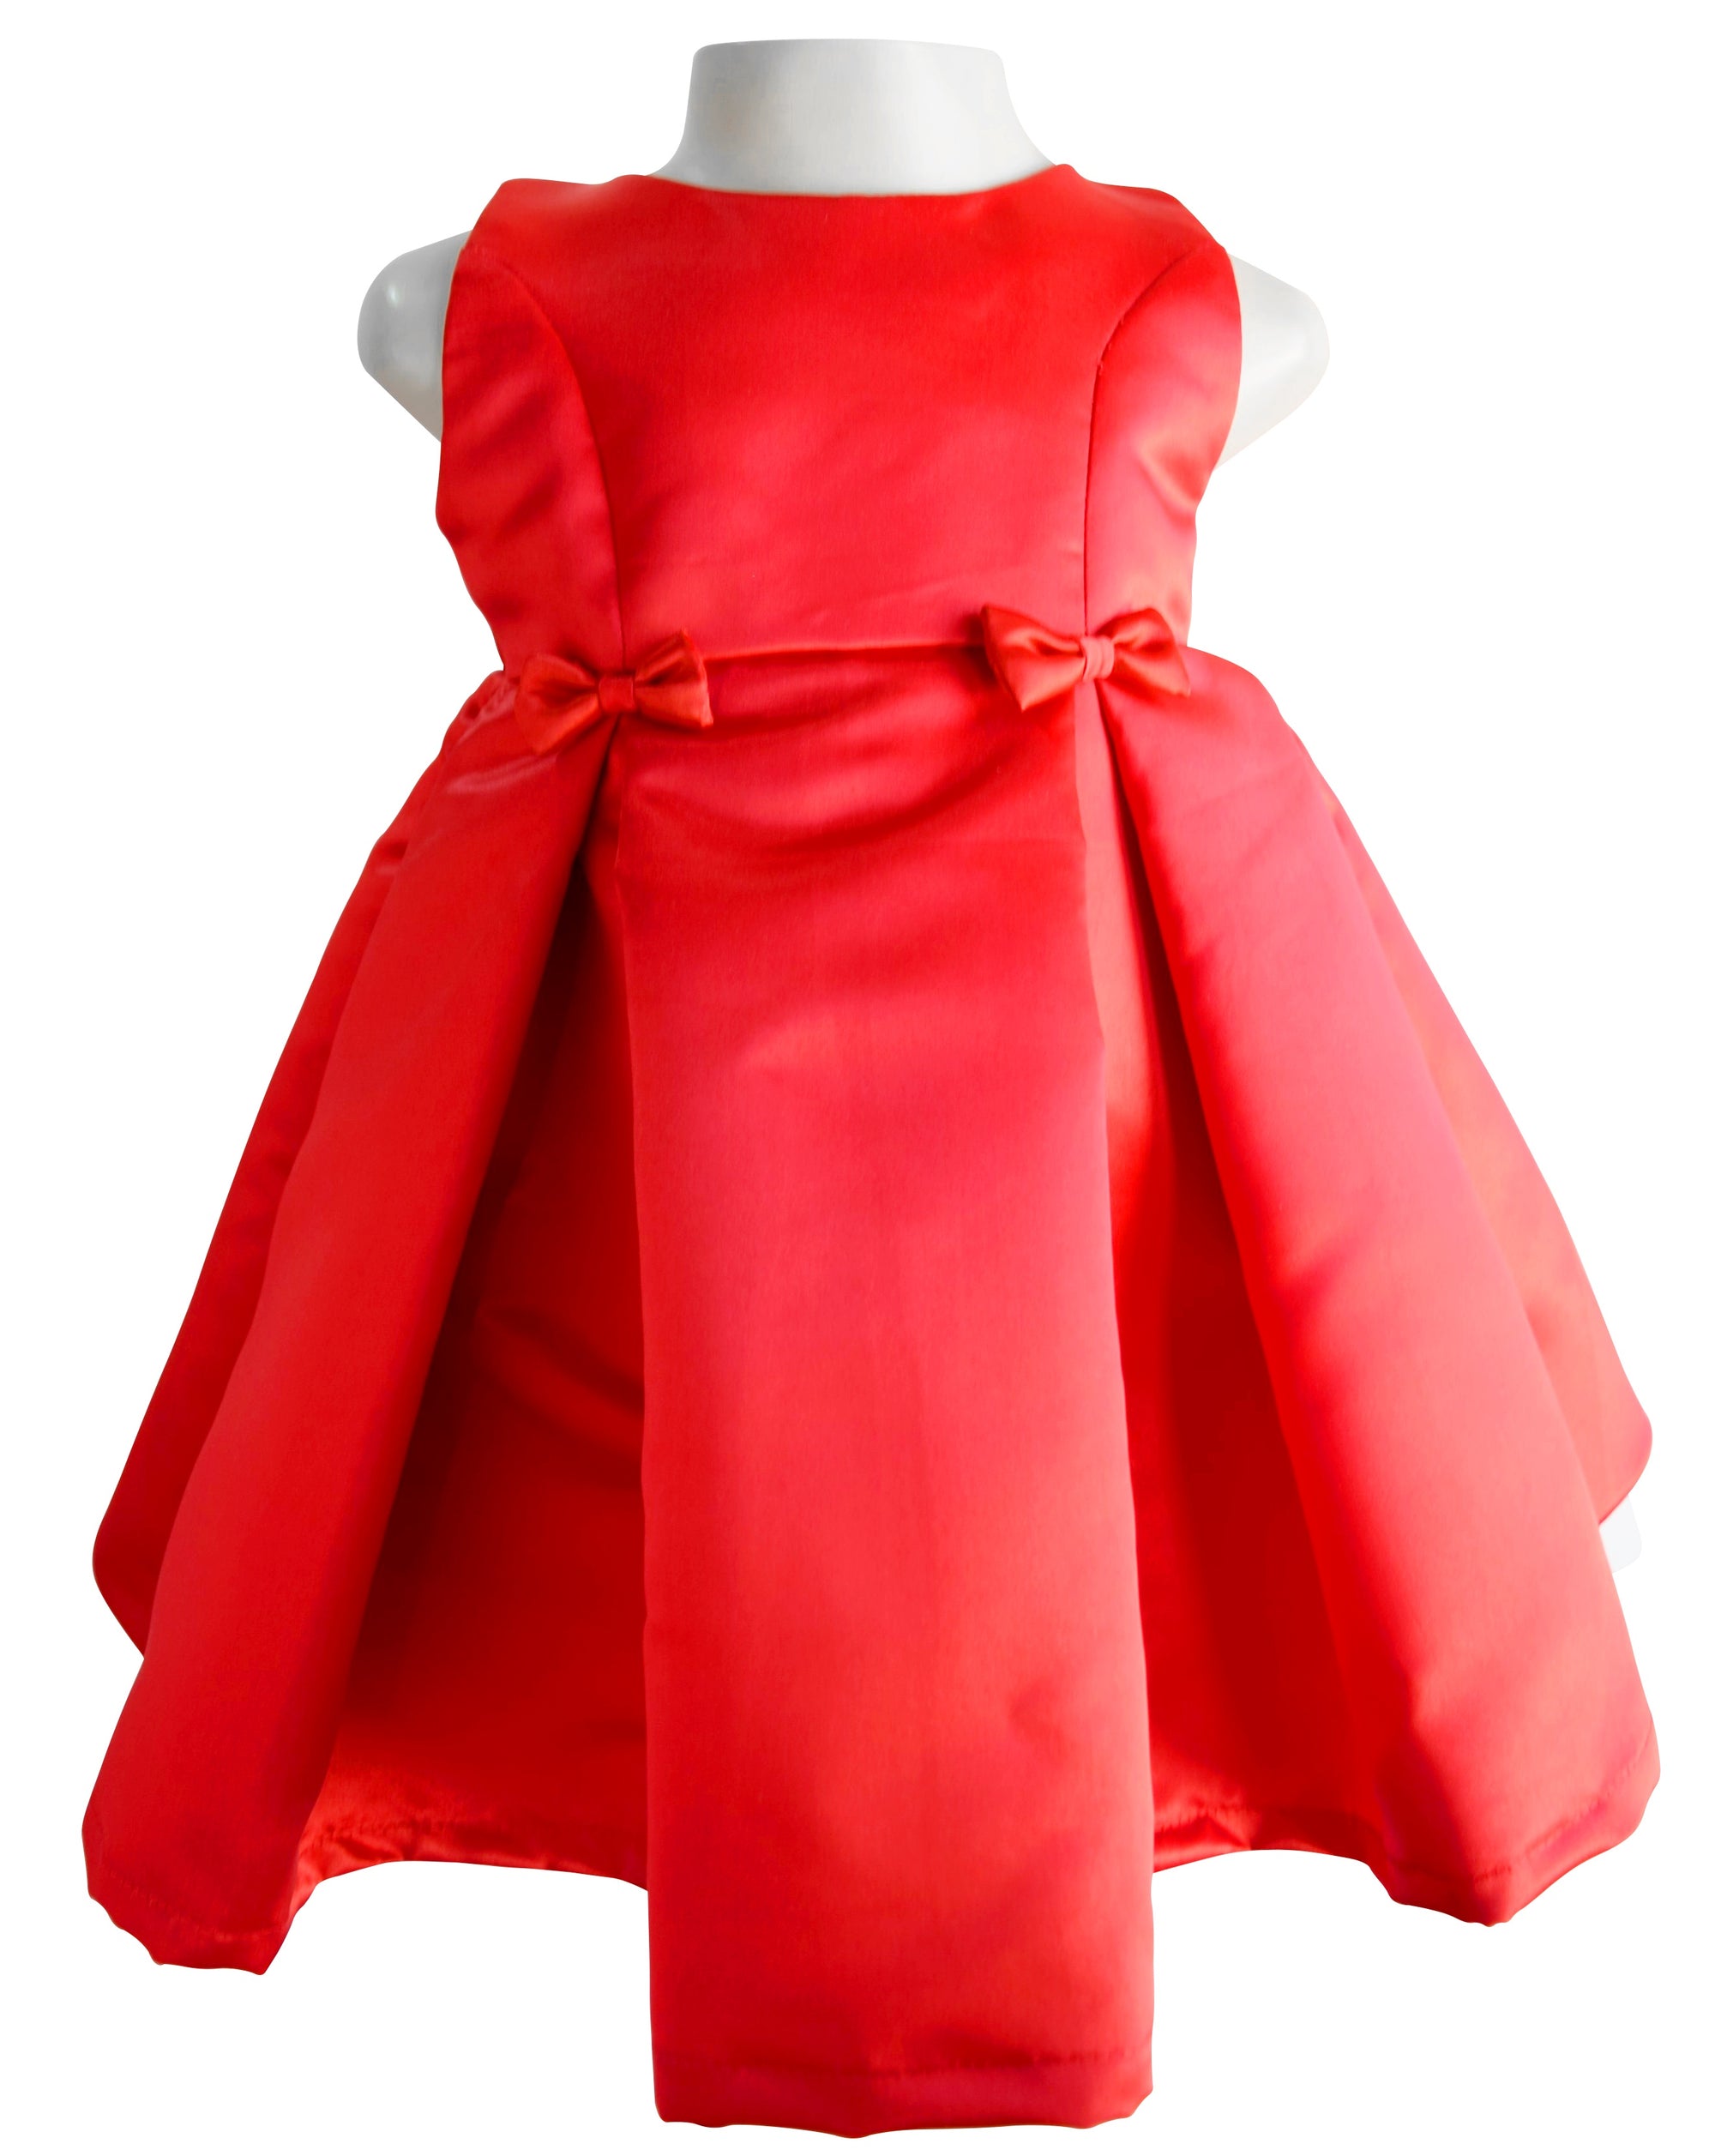 Vintage Spanish Princess Red Dress For Baby Girls Perfect For Toddler  Birthday Parties And Princess Evening Gown Strawberry Vintage Style  Vestidos 210615 From Bai09, $36.13 | DHgate.Com